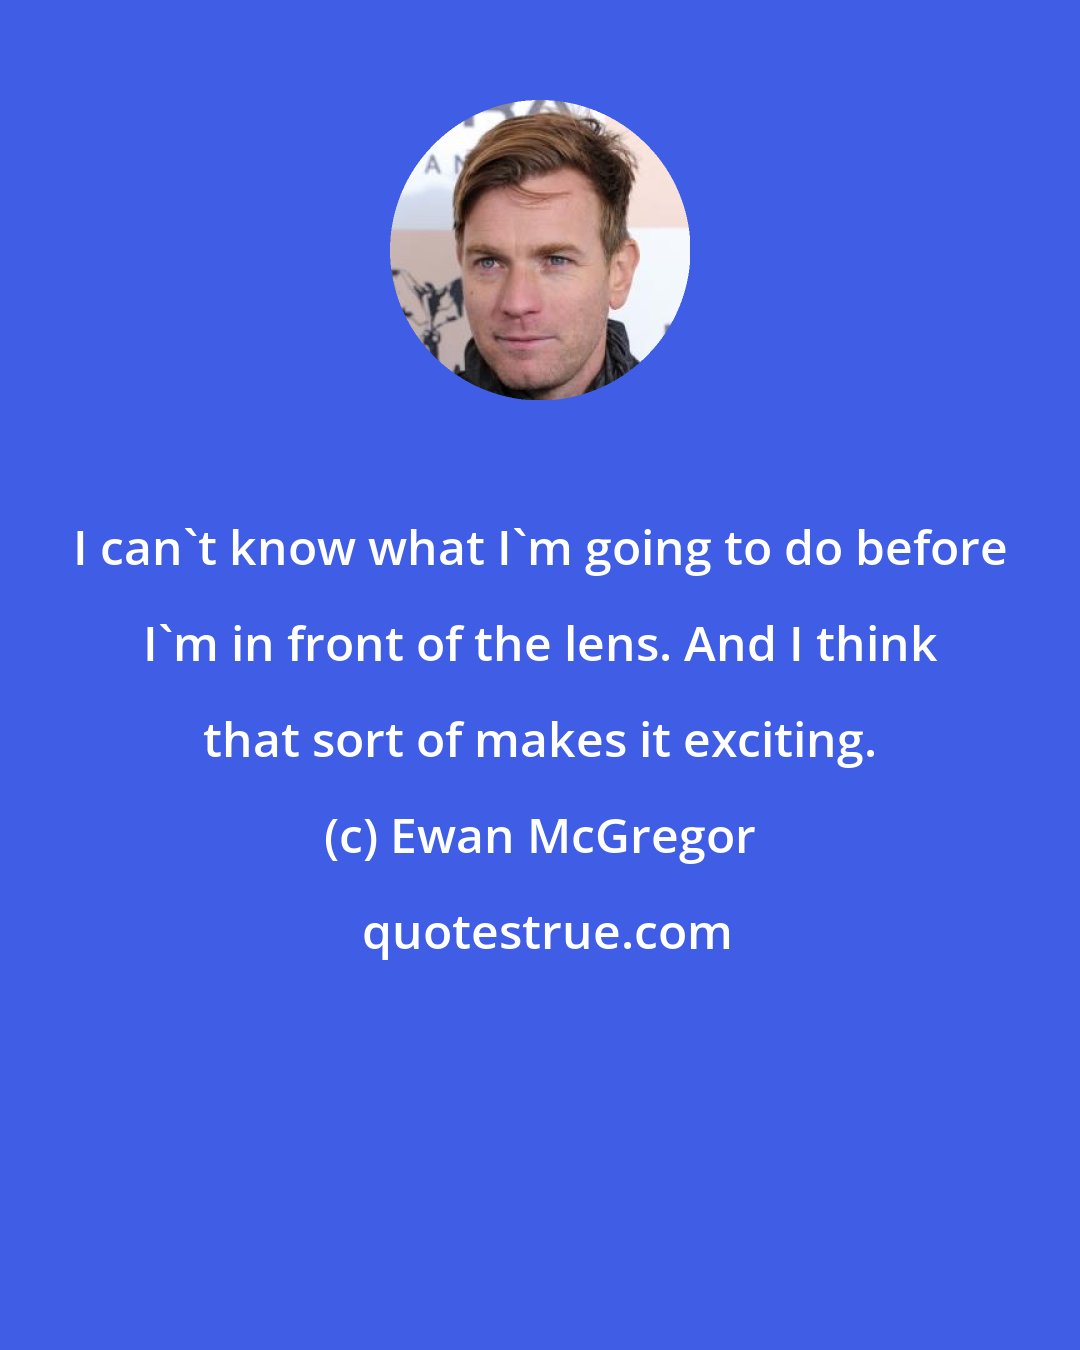 Ewan McGregor: I can't know what I'm going to do before I'm in front of the lens. And I think that sort of makes it exciting.